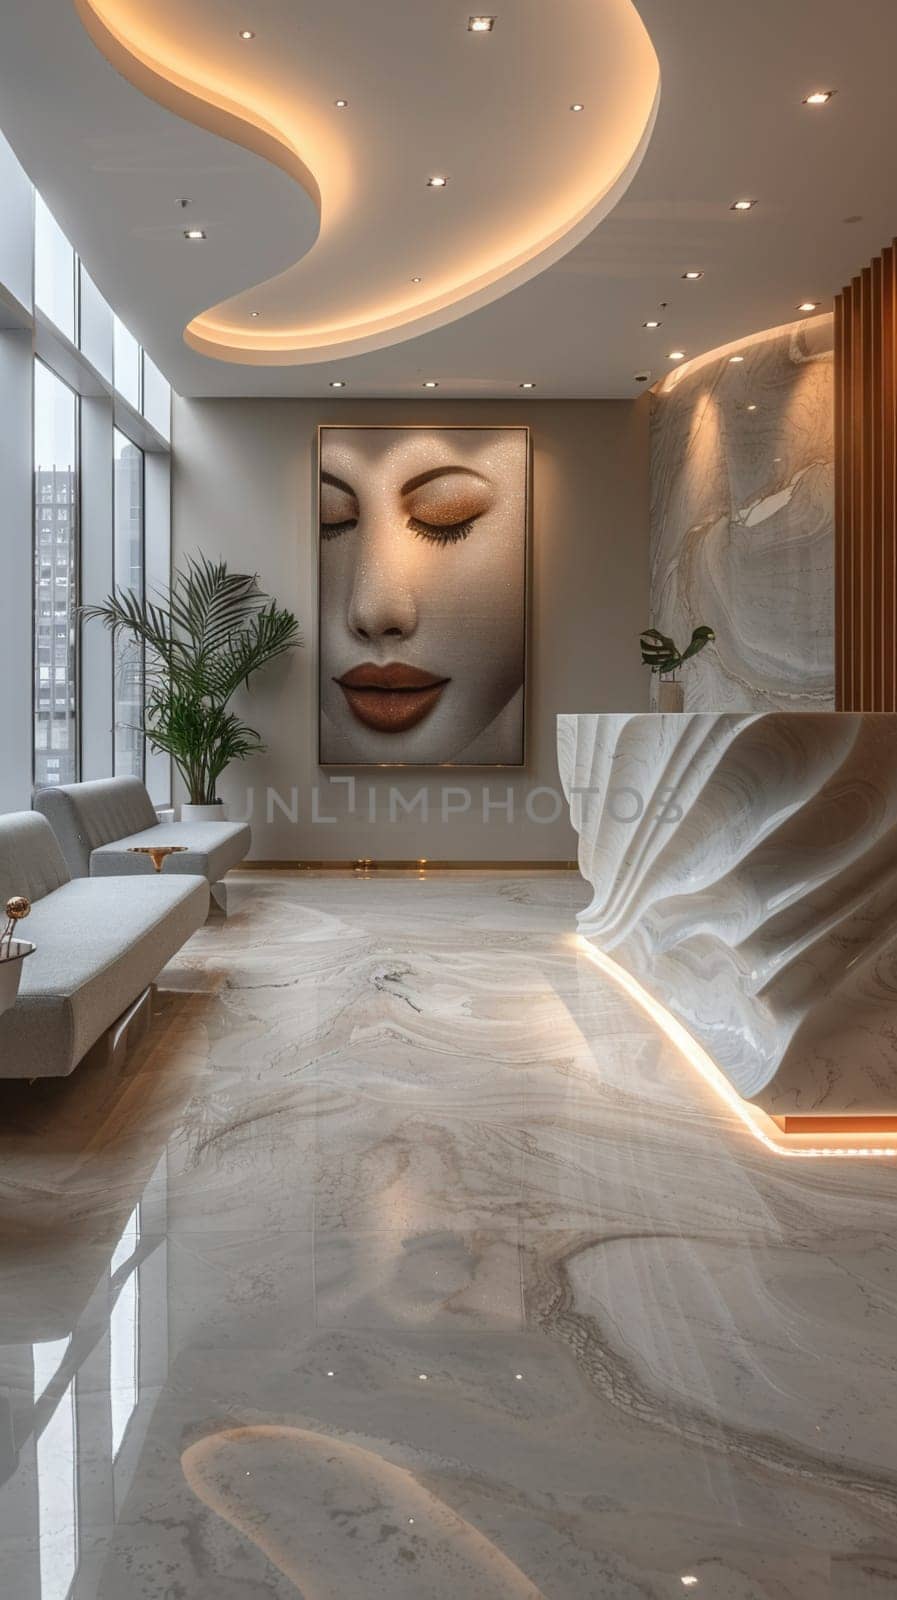 Elegant art gallery reception area with sculptural lighting, white walls, and modern art.